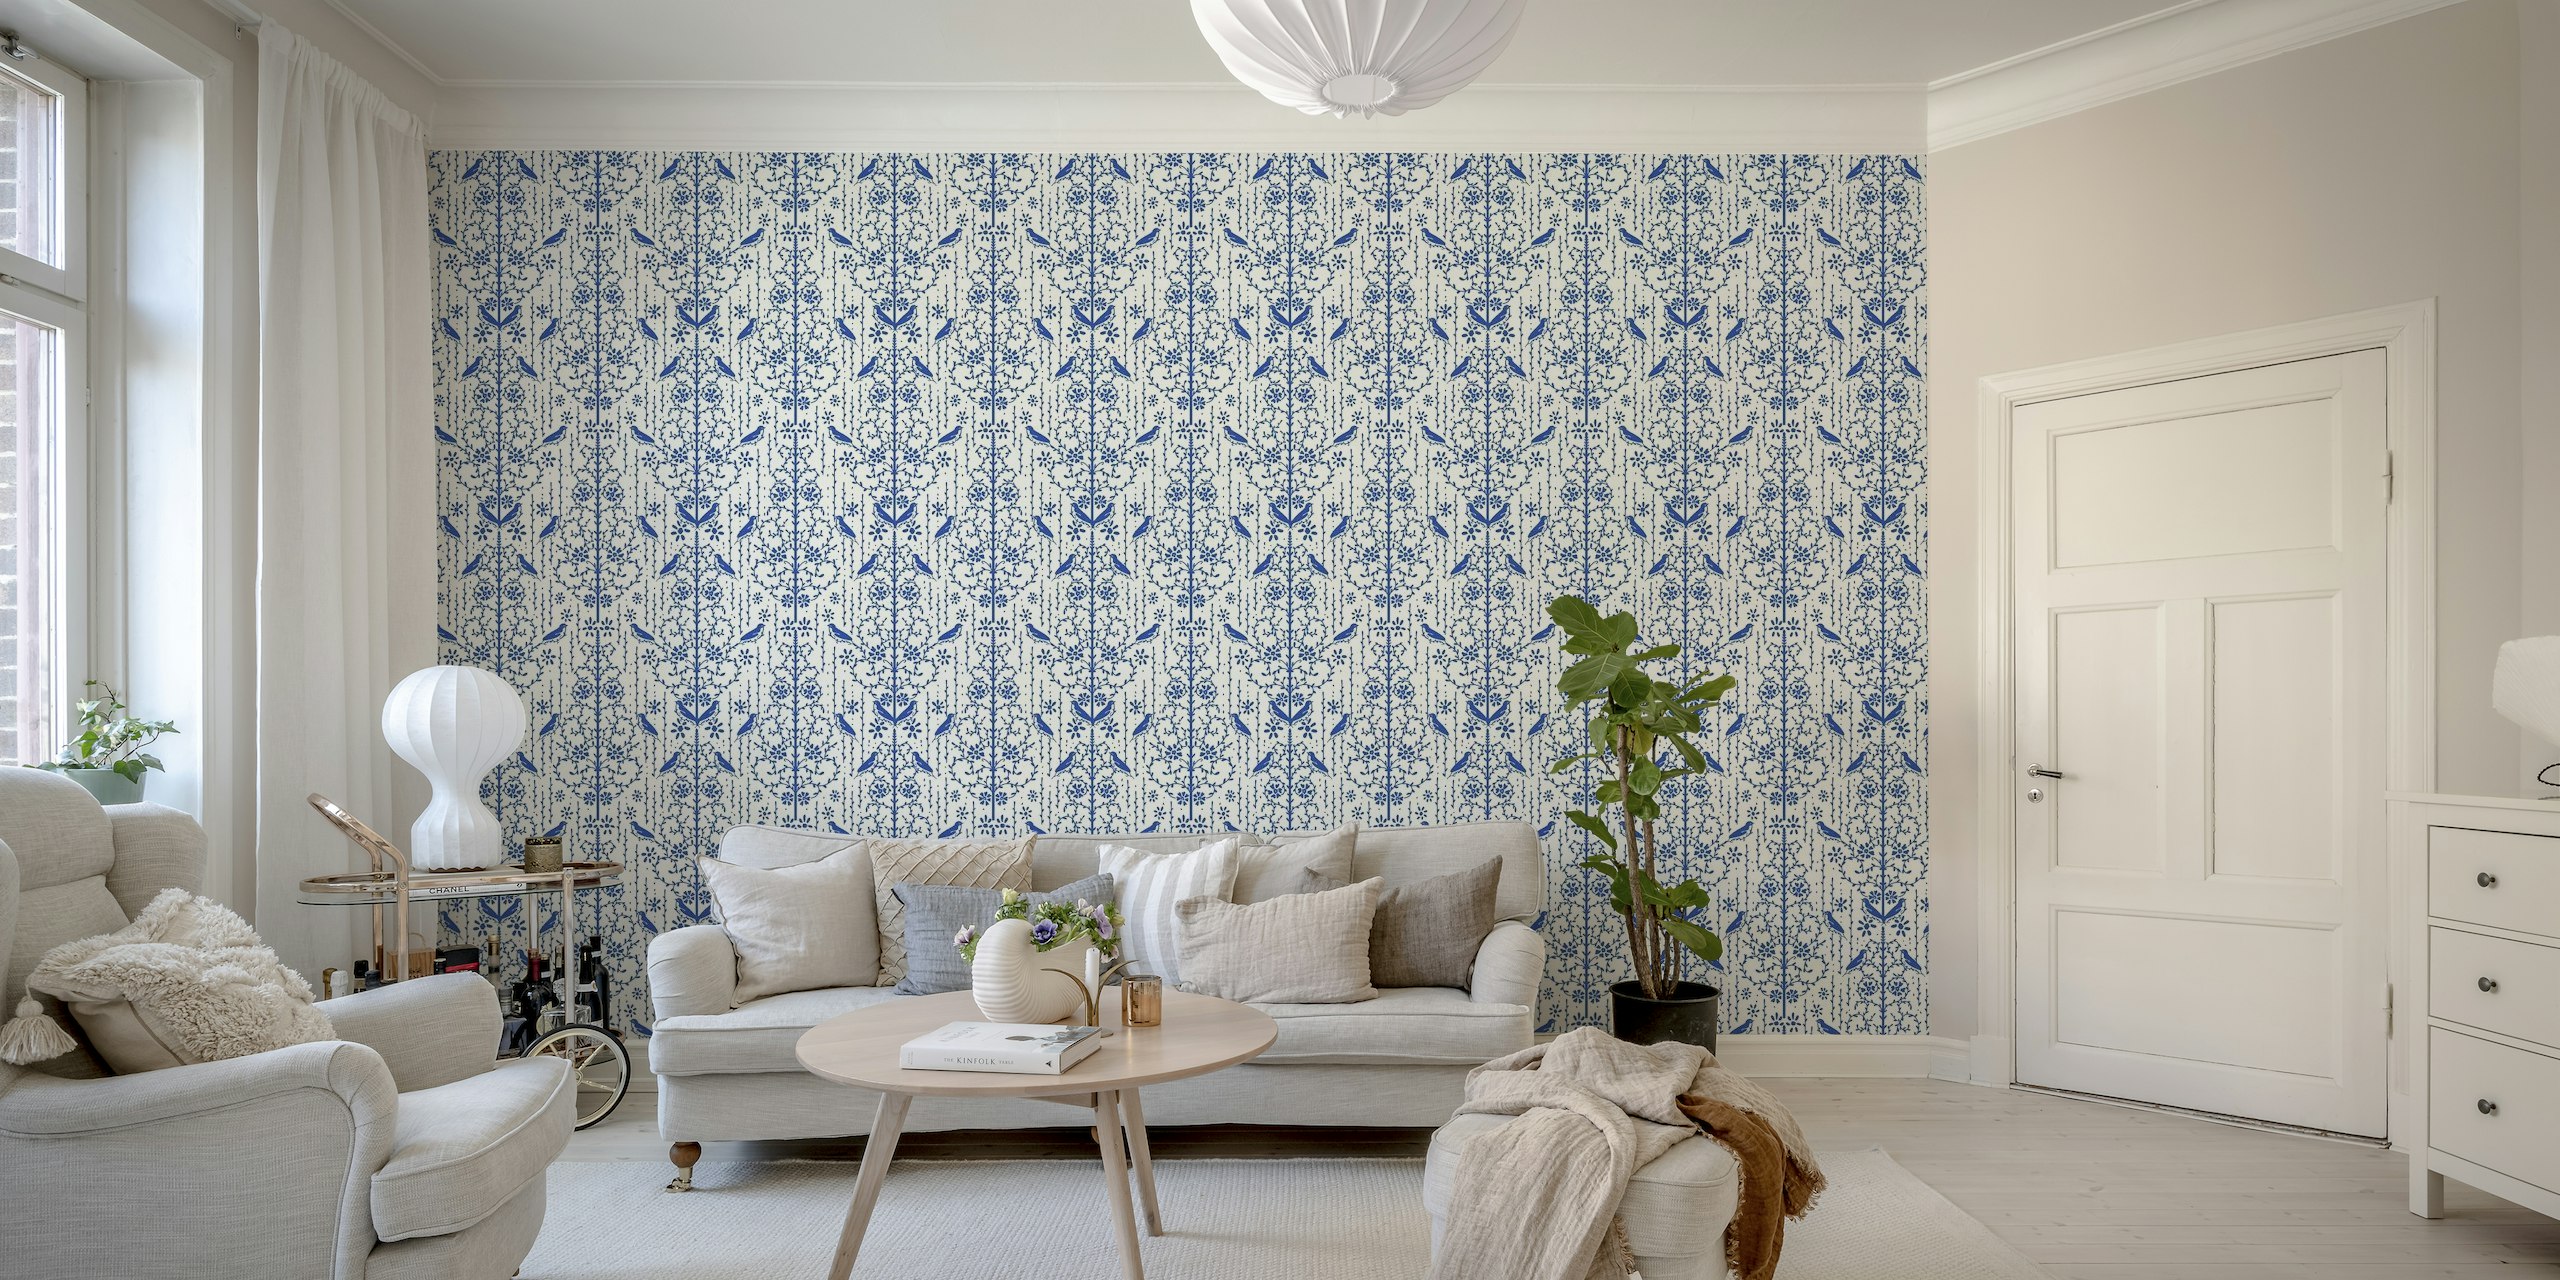 Classic Blue French Cottage wall mural with blue floral patterns on a white background